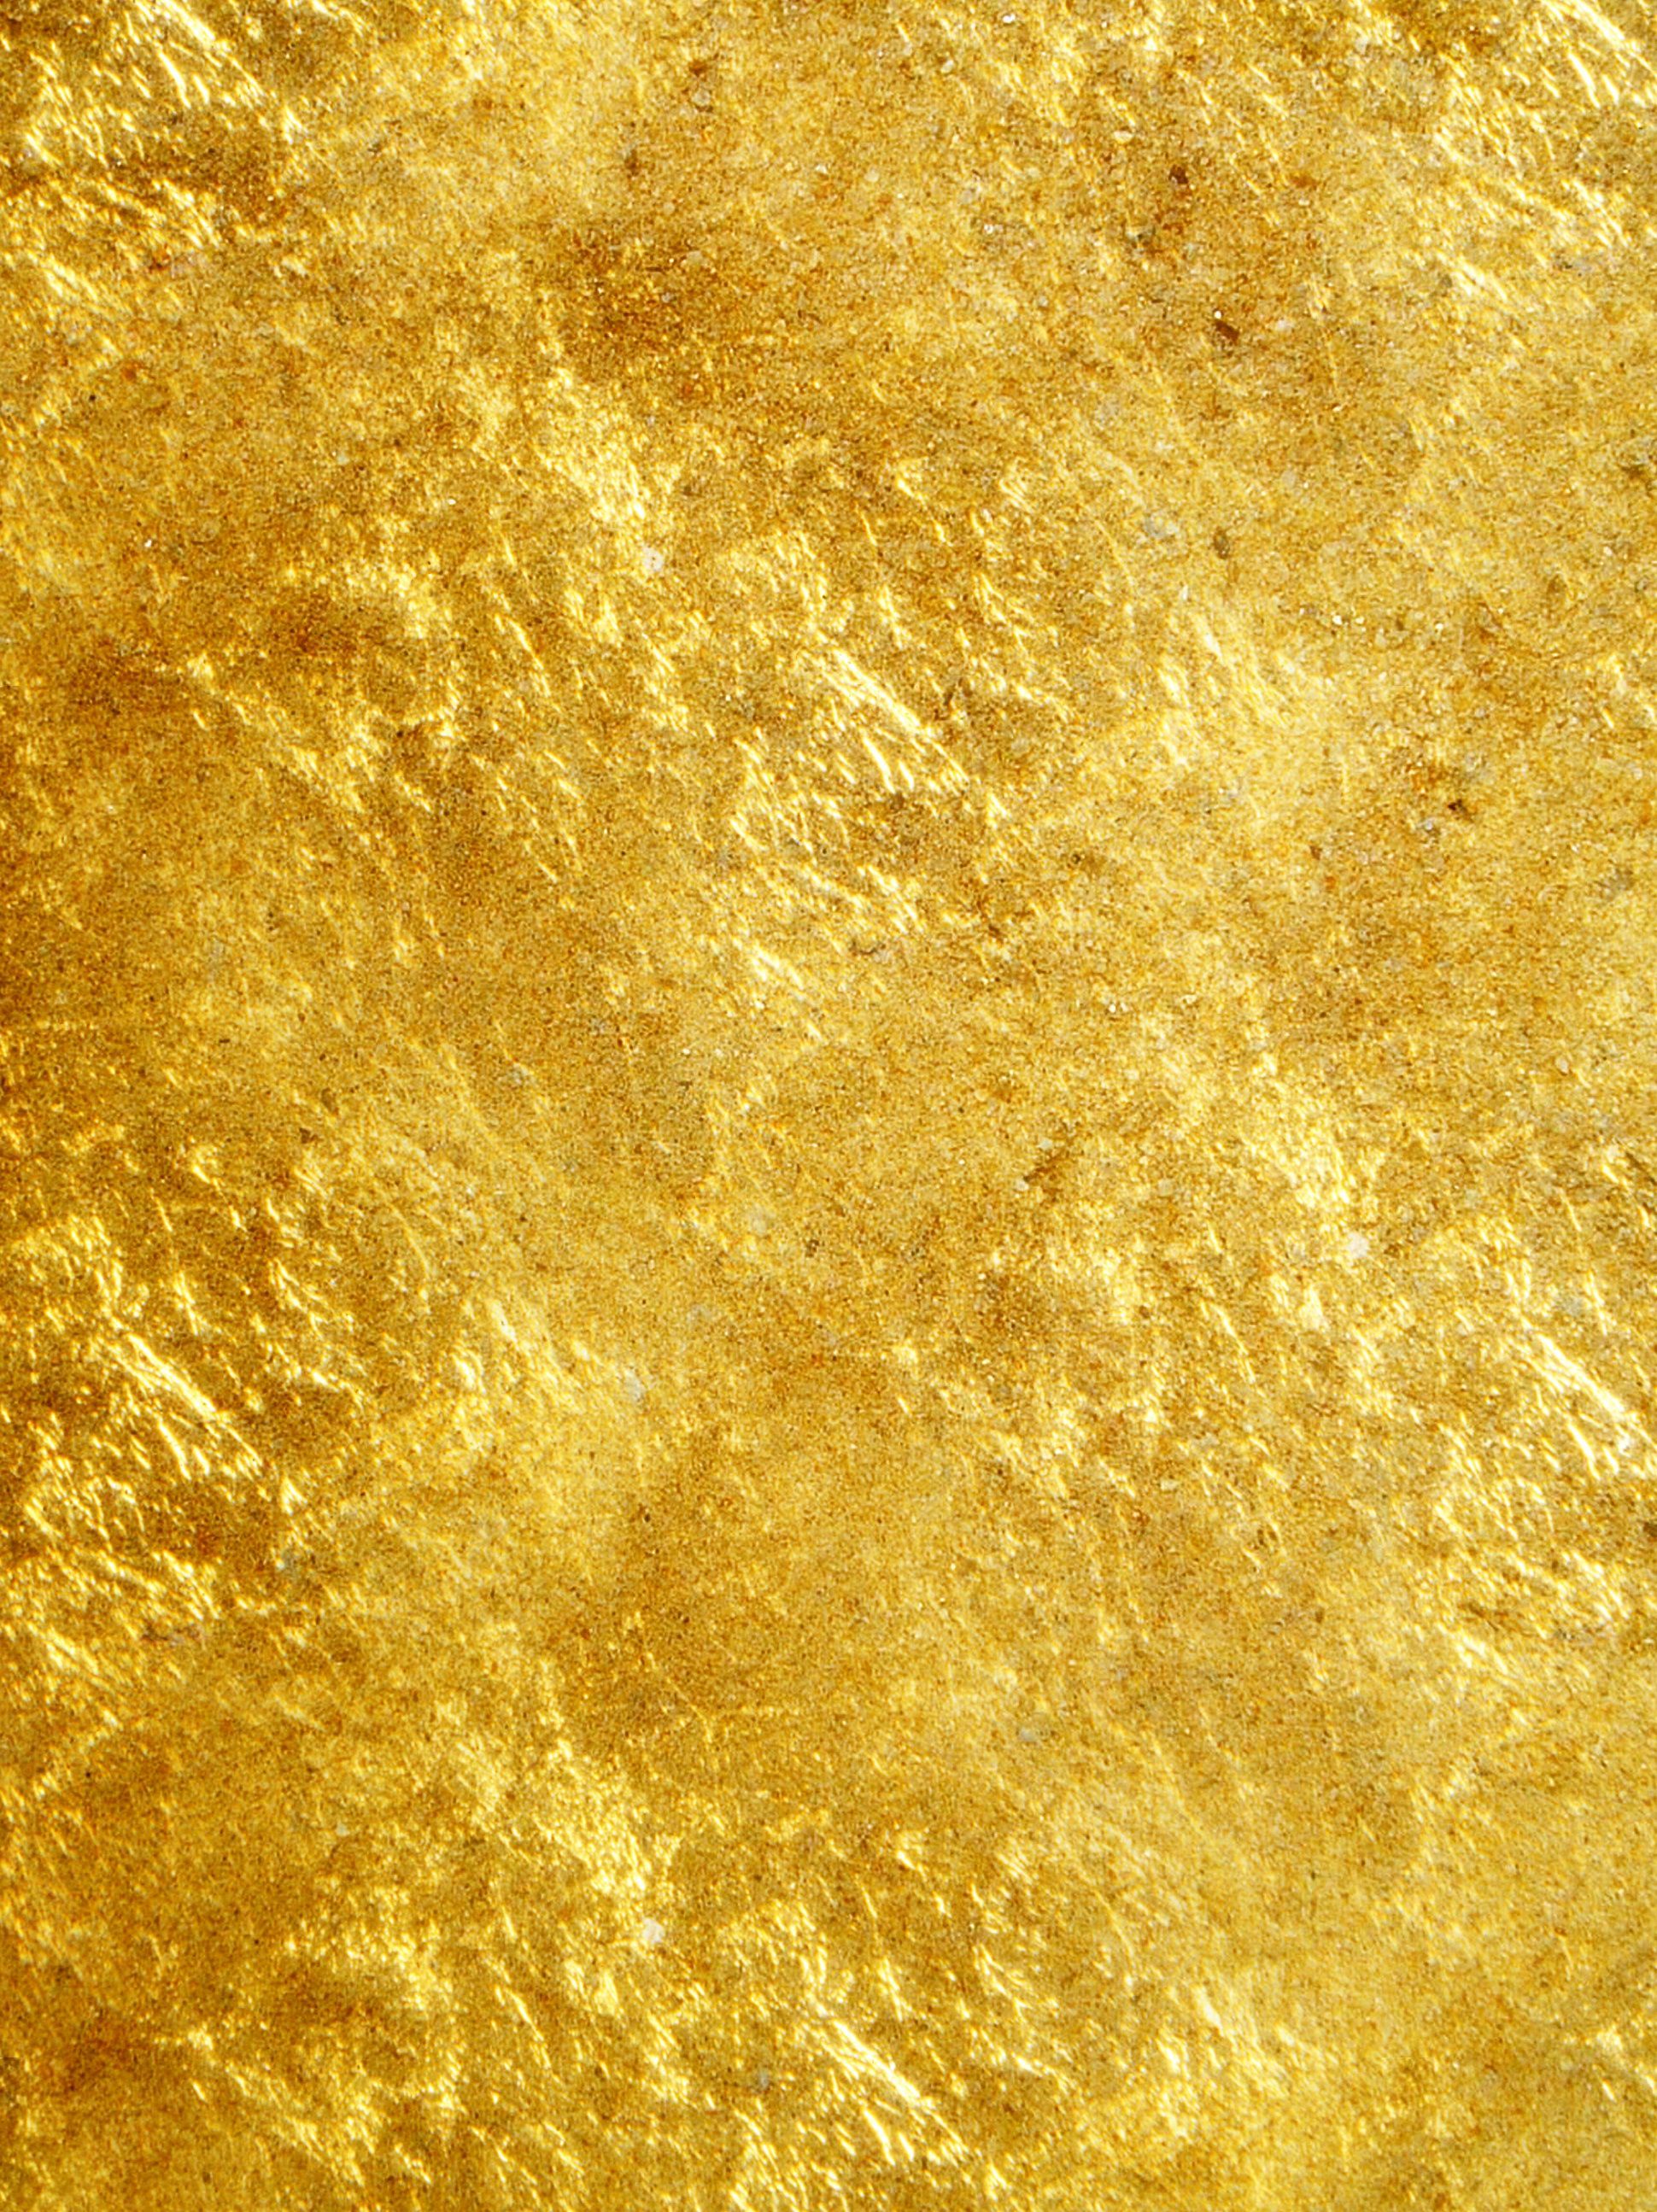 Free photo: Gold Texture, Gold, Graphic Download